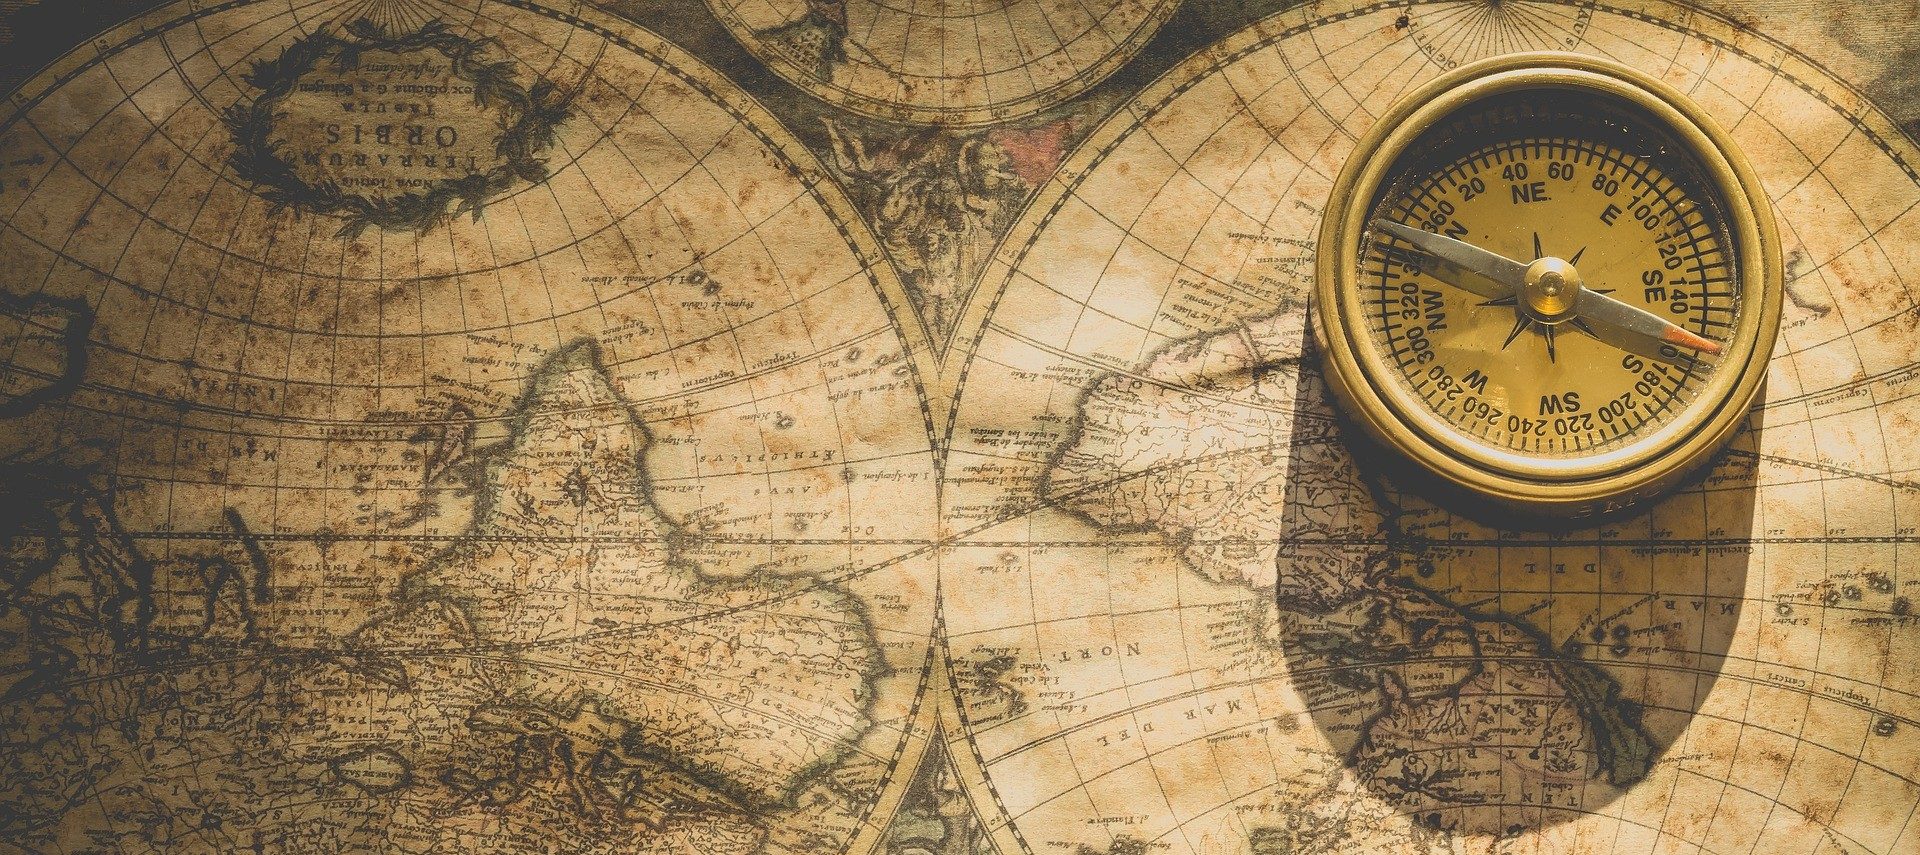 An old world map and small round golden compass sitting on a table